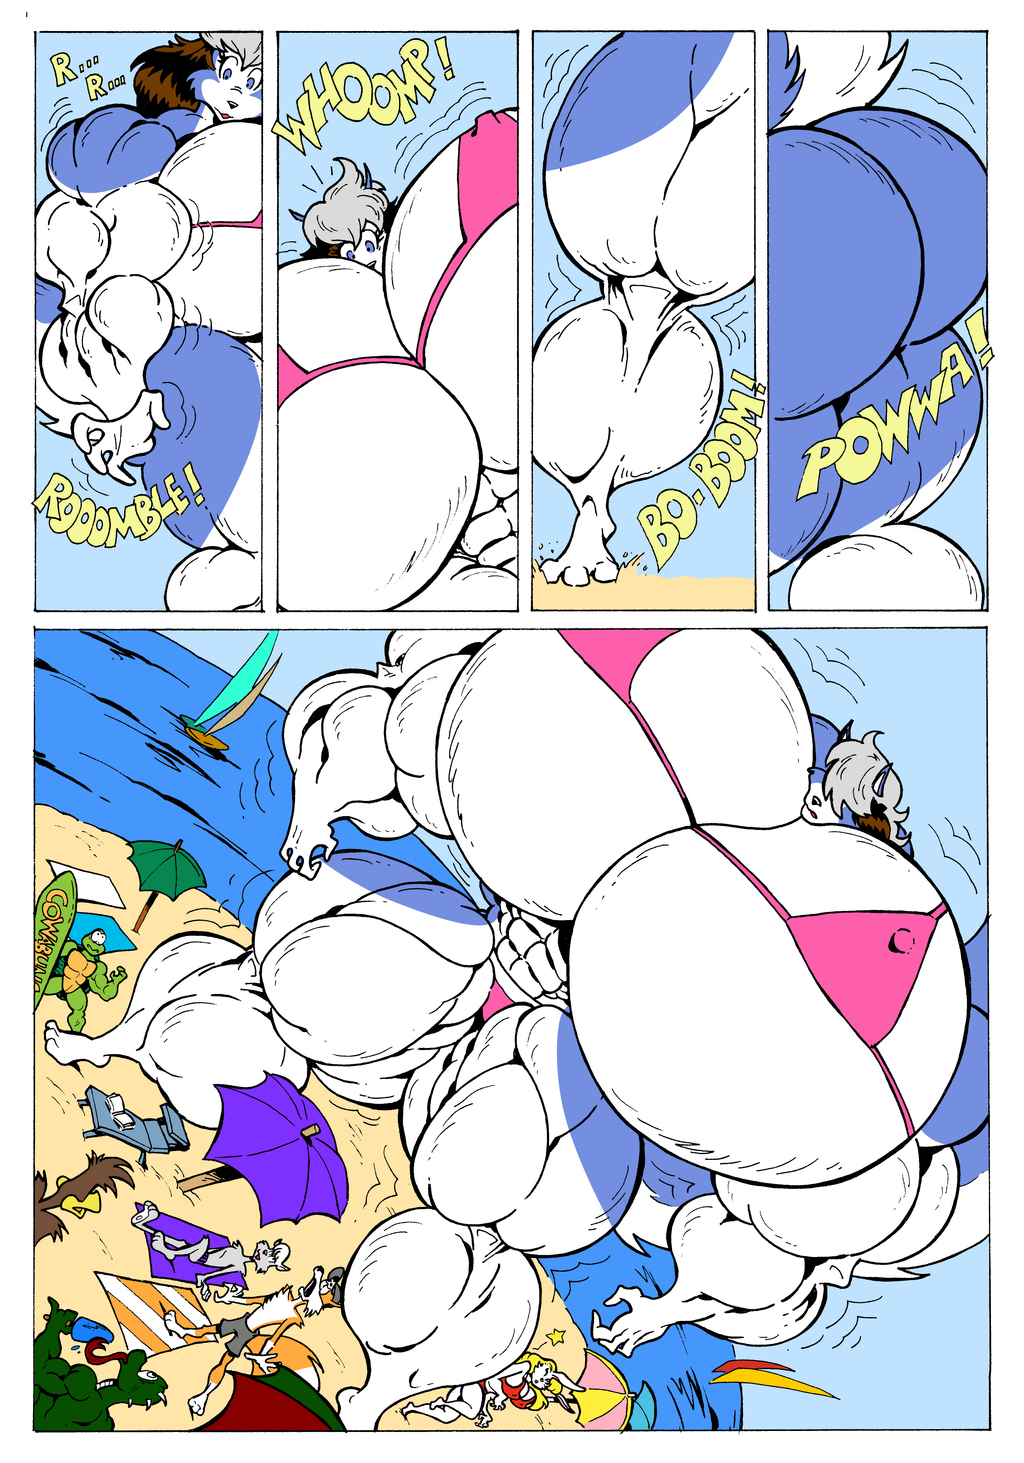 Beach Growth 6 (Colored)